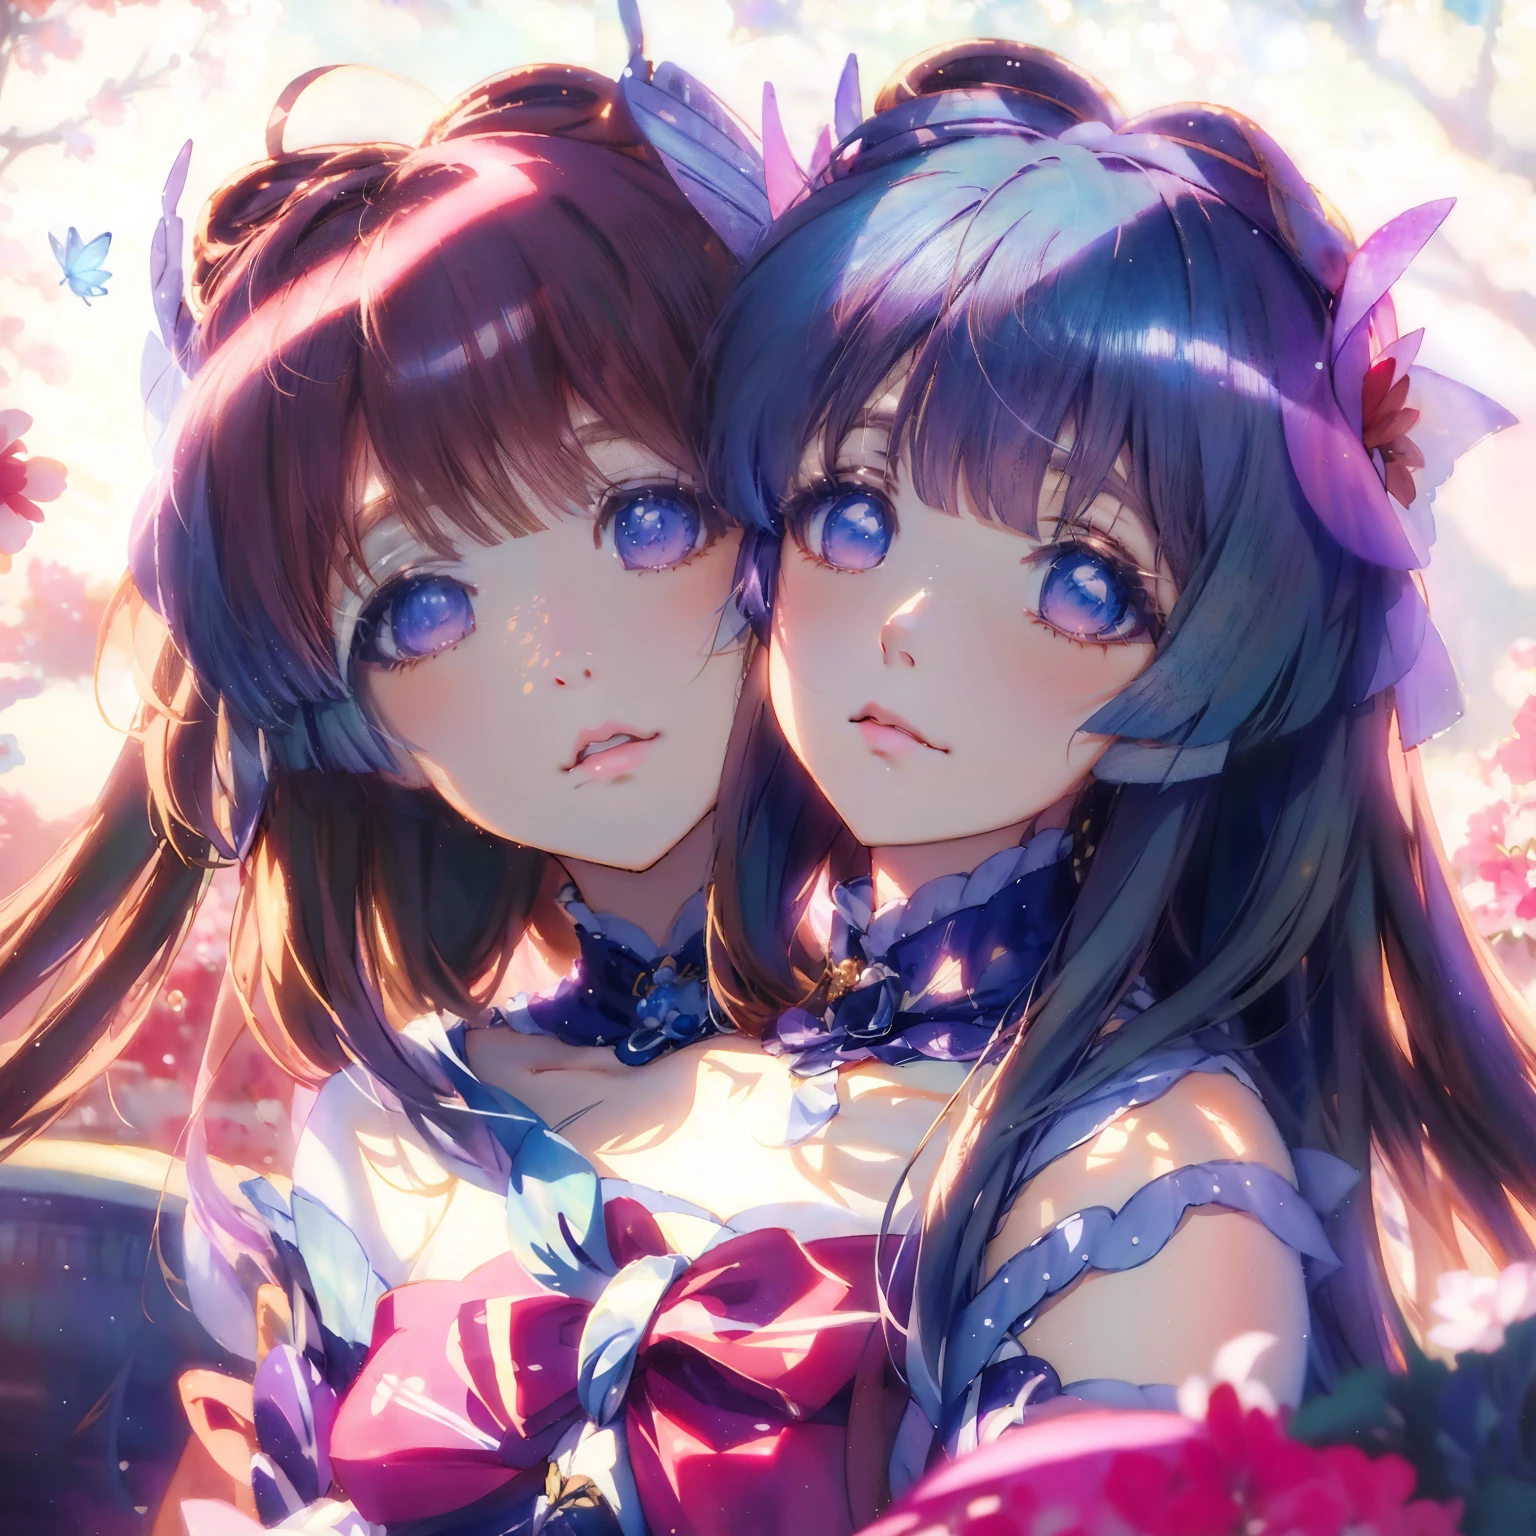 (masterpiece, best quality), best resolution, (2heads:1.5), 1girl, kokomi character, conjoined, anime girls with long hair and butterfly wings in their hair, two beautiful anime girls, anime styled 3d, beautiful anime style, 3d anime girl, 🌺 cgsociety, anime highly detailed, beautiful gemini twins, 3 d anime realistic, realistic anime 3 d style, anime 3 d art, beautiful anime girl, photorealistic anime, anime style 4 k, anime girls